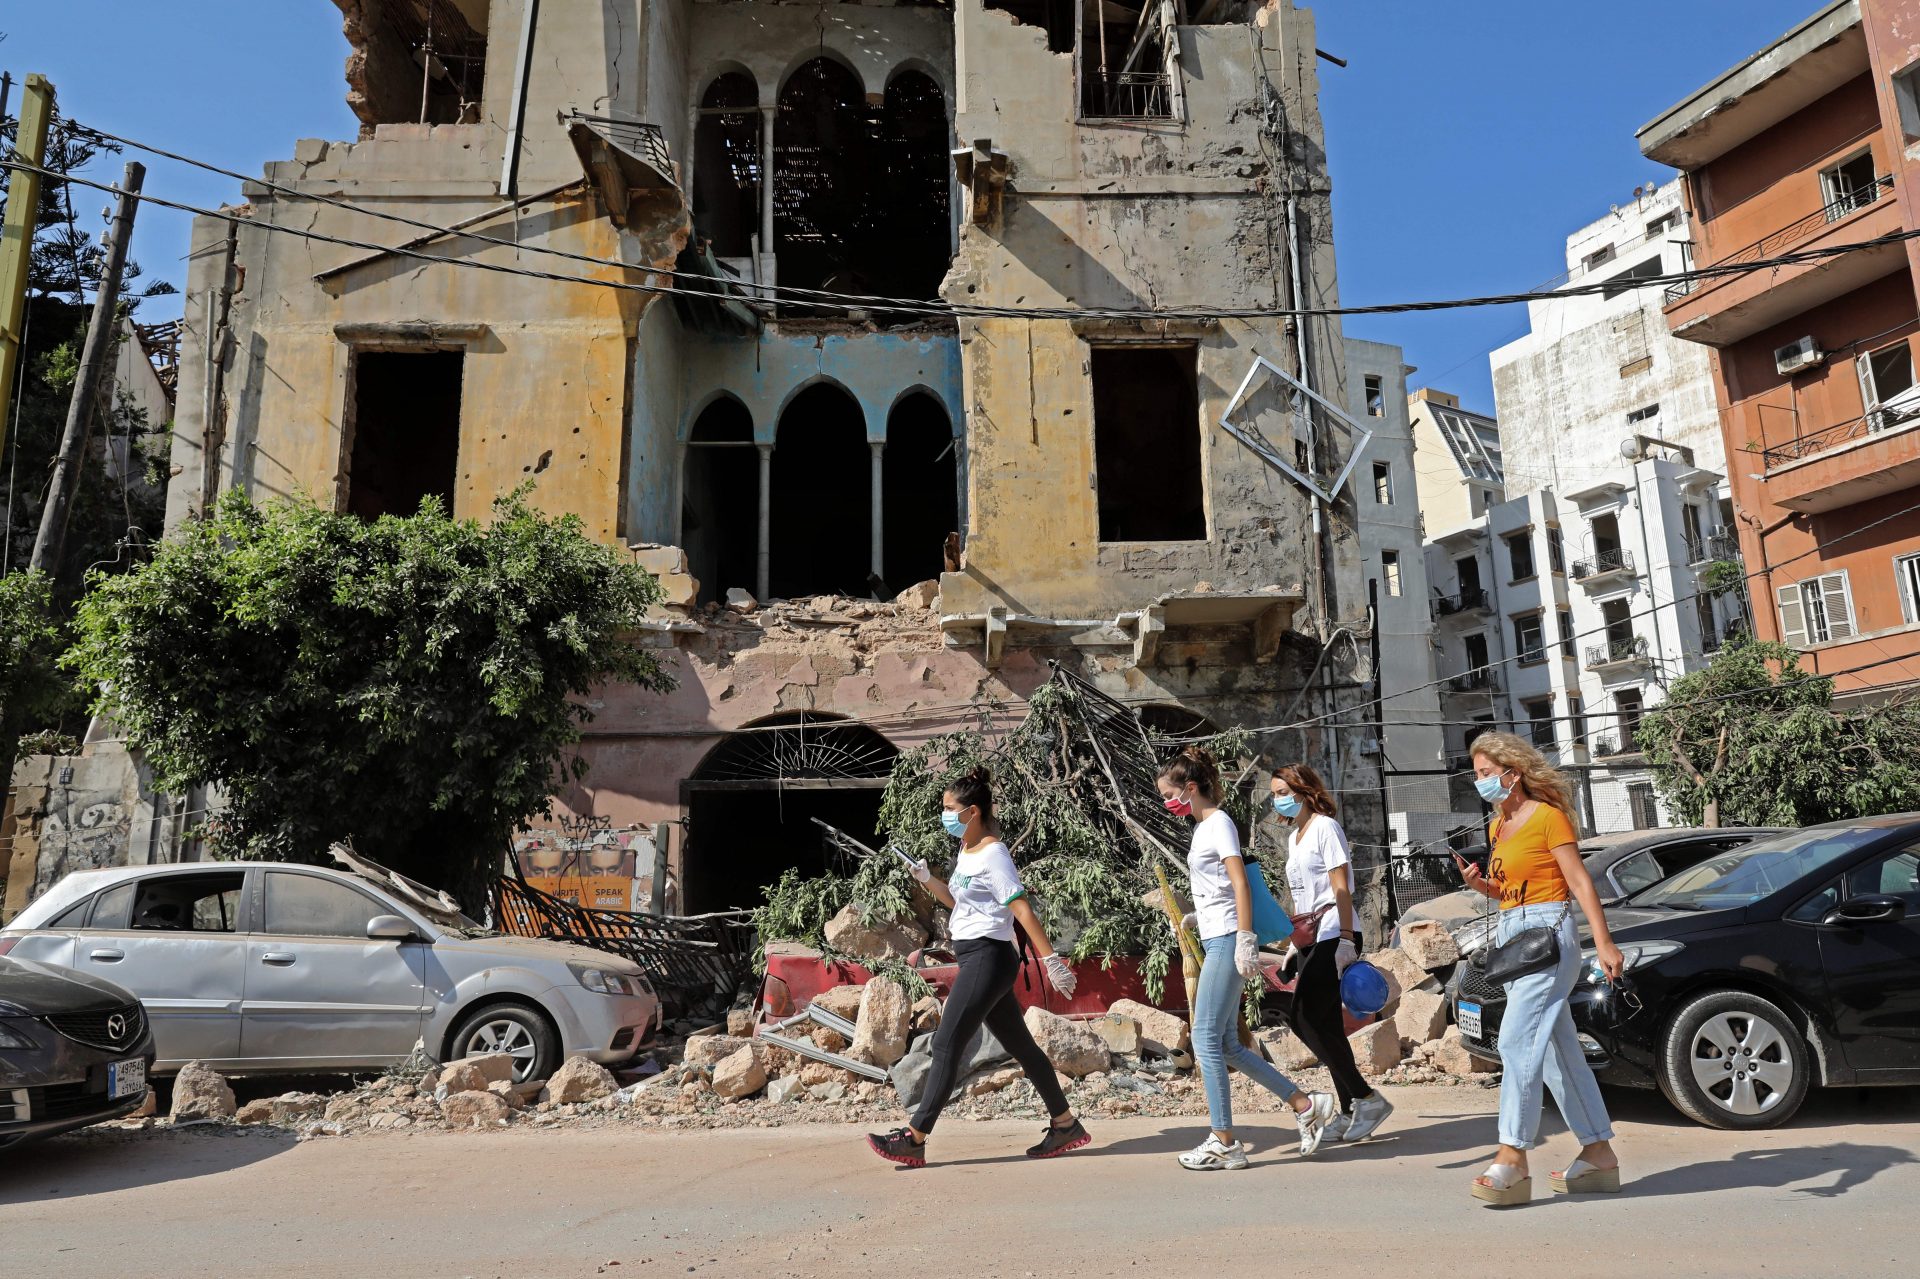 Women walk past a damaged building in the aftermath of Tuesday's blast that tore through Lebanon's capital on Wednesday. Rescuers searched for survivors in Beirut after a explosion killed more than 100 people and wounded thousands.